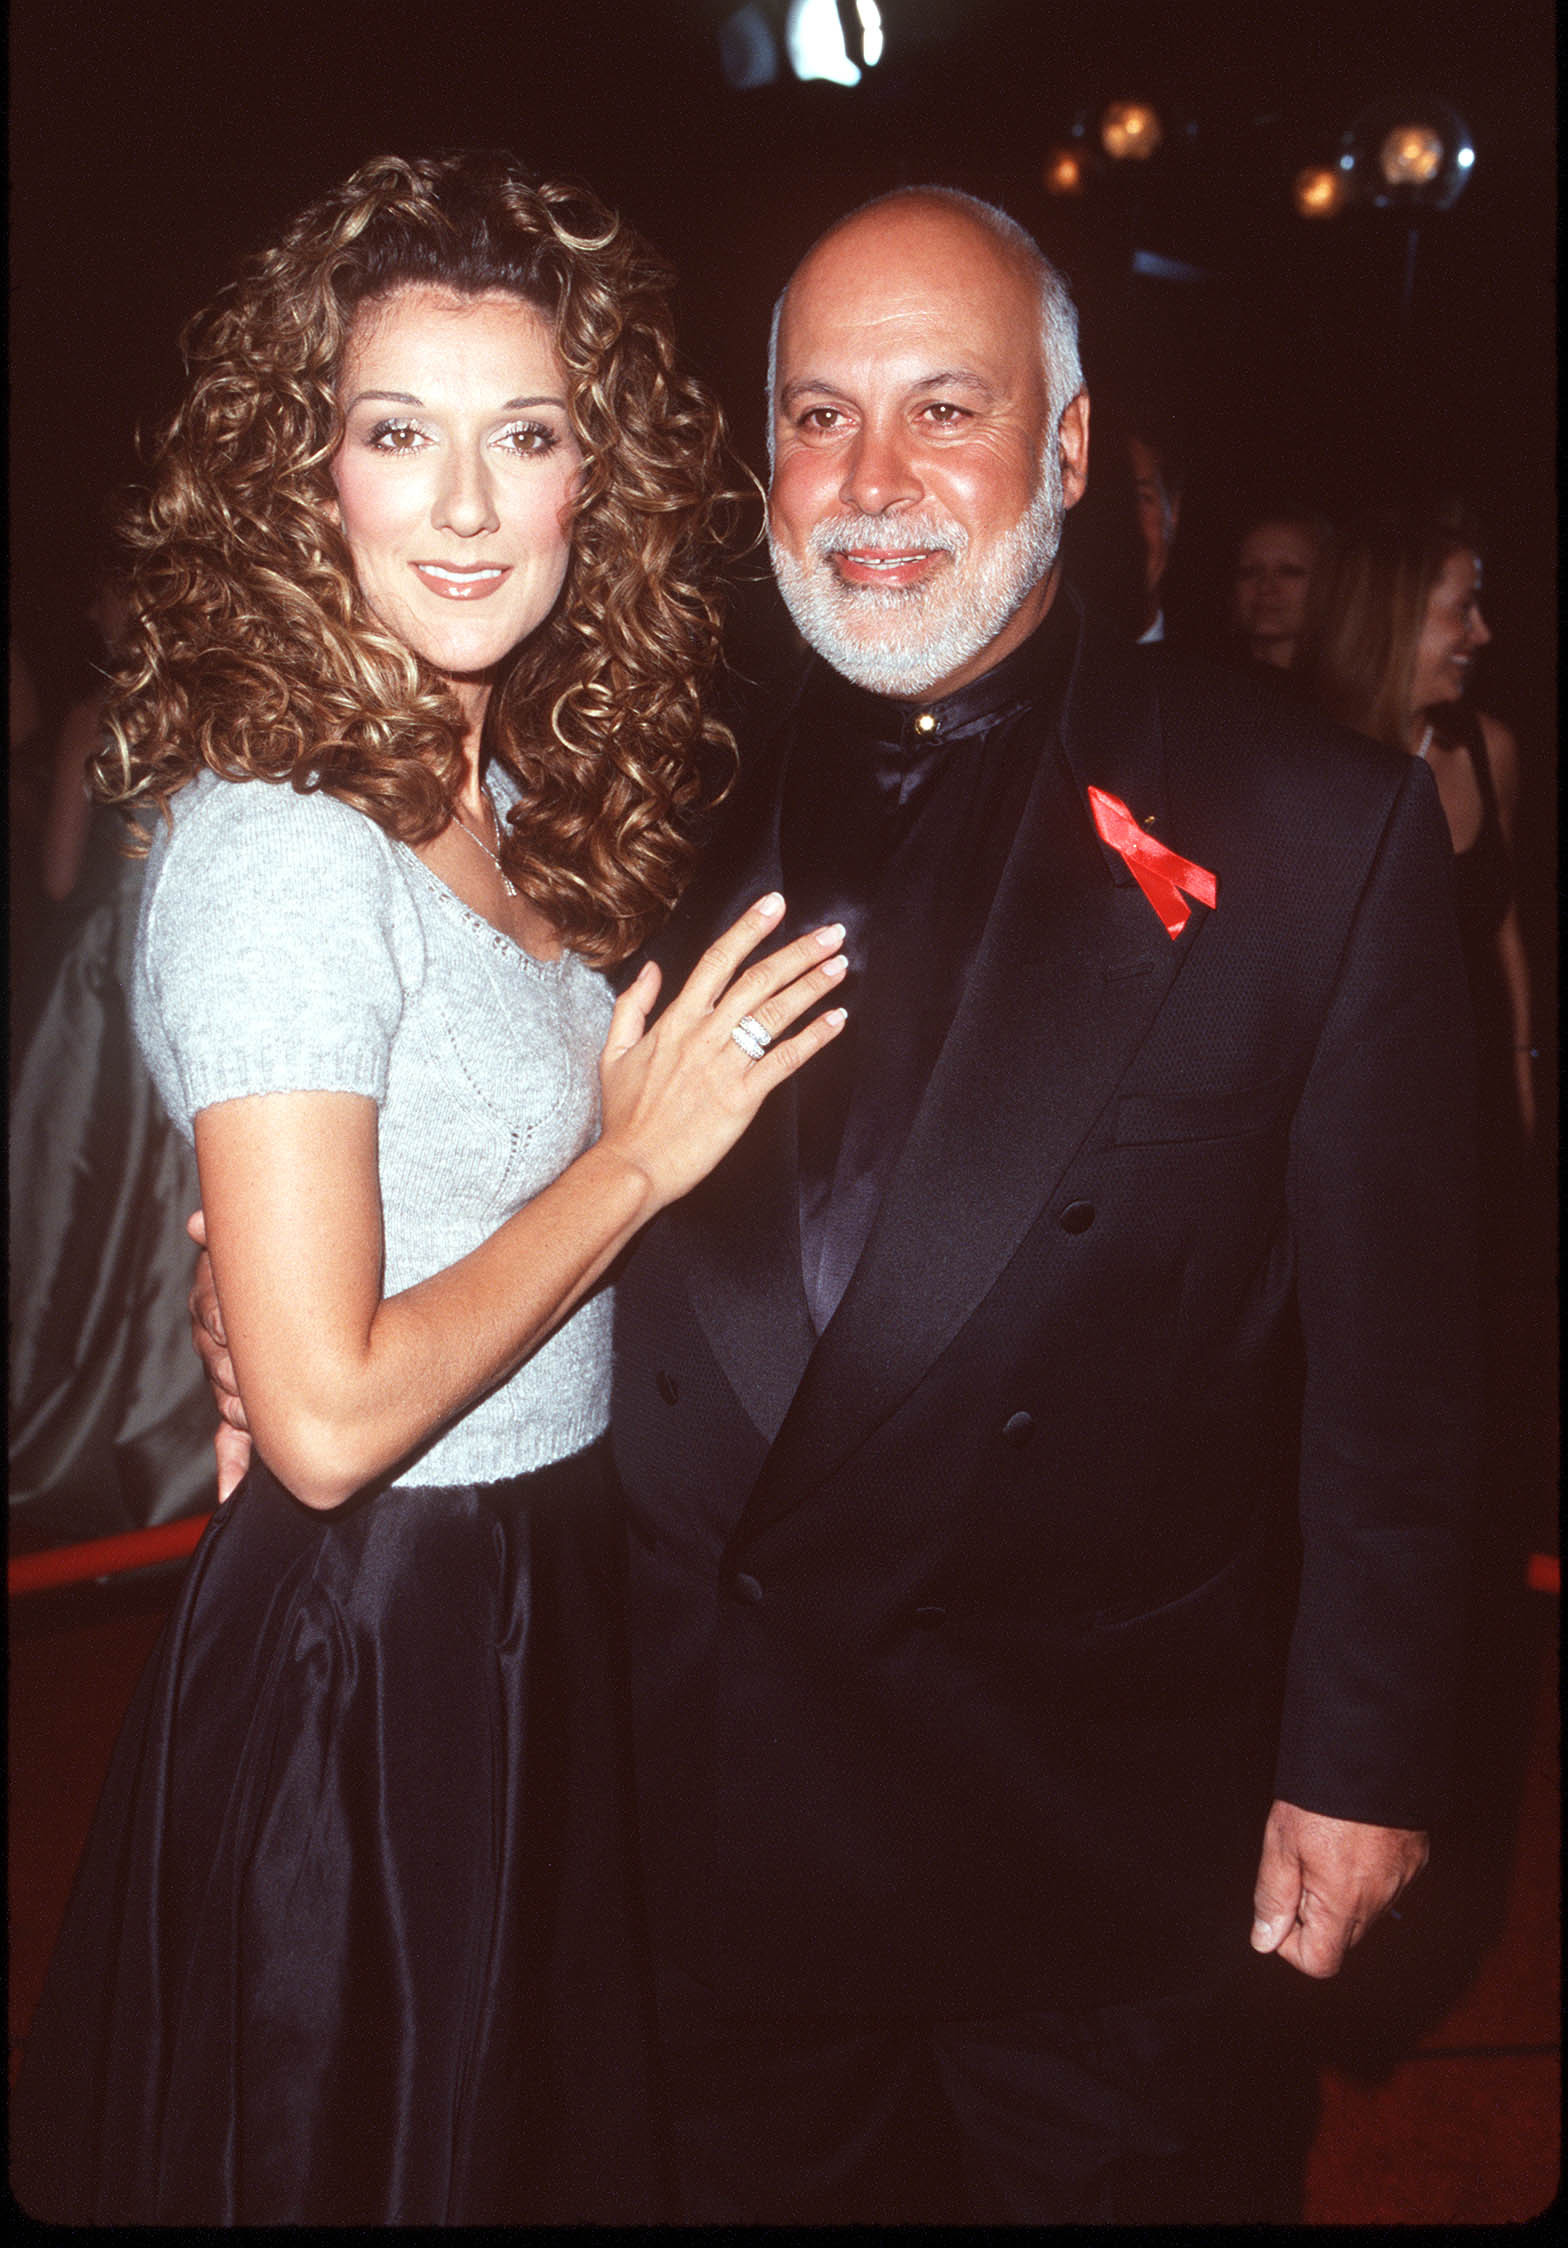 Celine Dion and Rene Angelil during The 25th Annual People's Choice Awards at Pasadena Civic Auditorium on January 10, 1999 in Pasadena, California. | Source: Getty Images